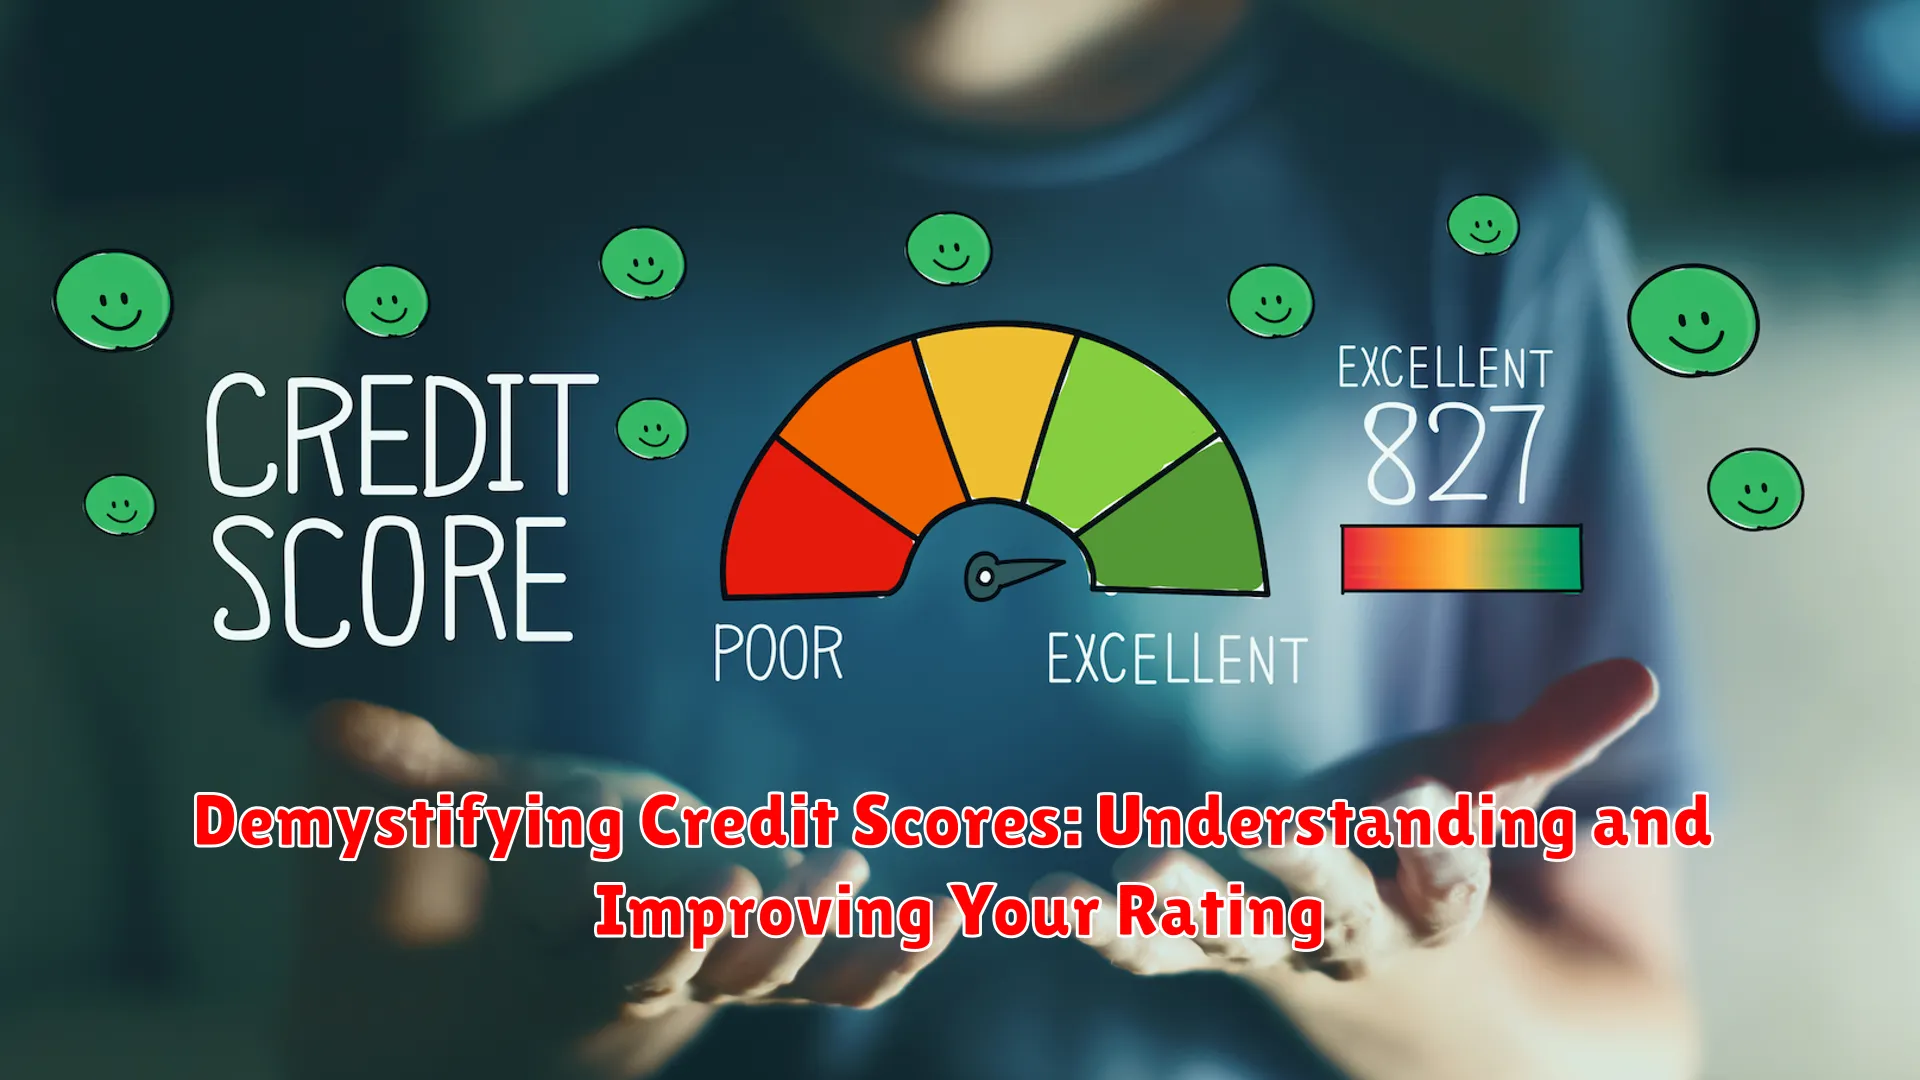 Demystifying Credit Scores: Understanding and Improving Your Rating